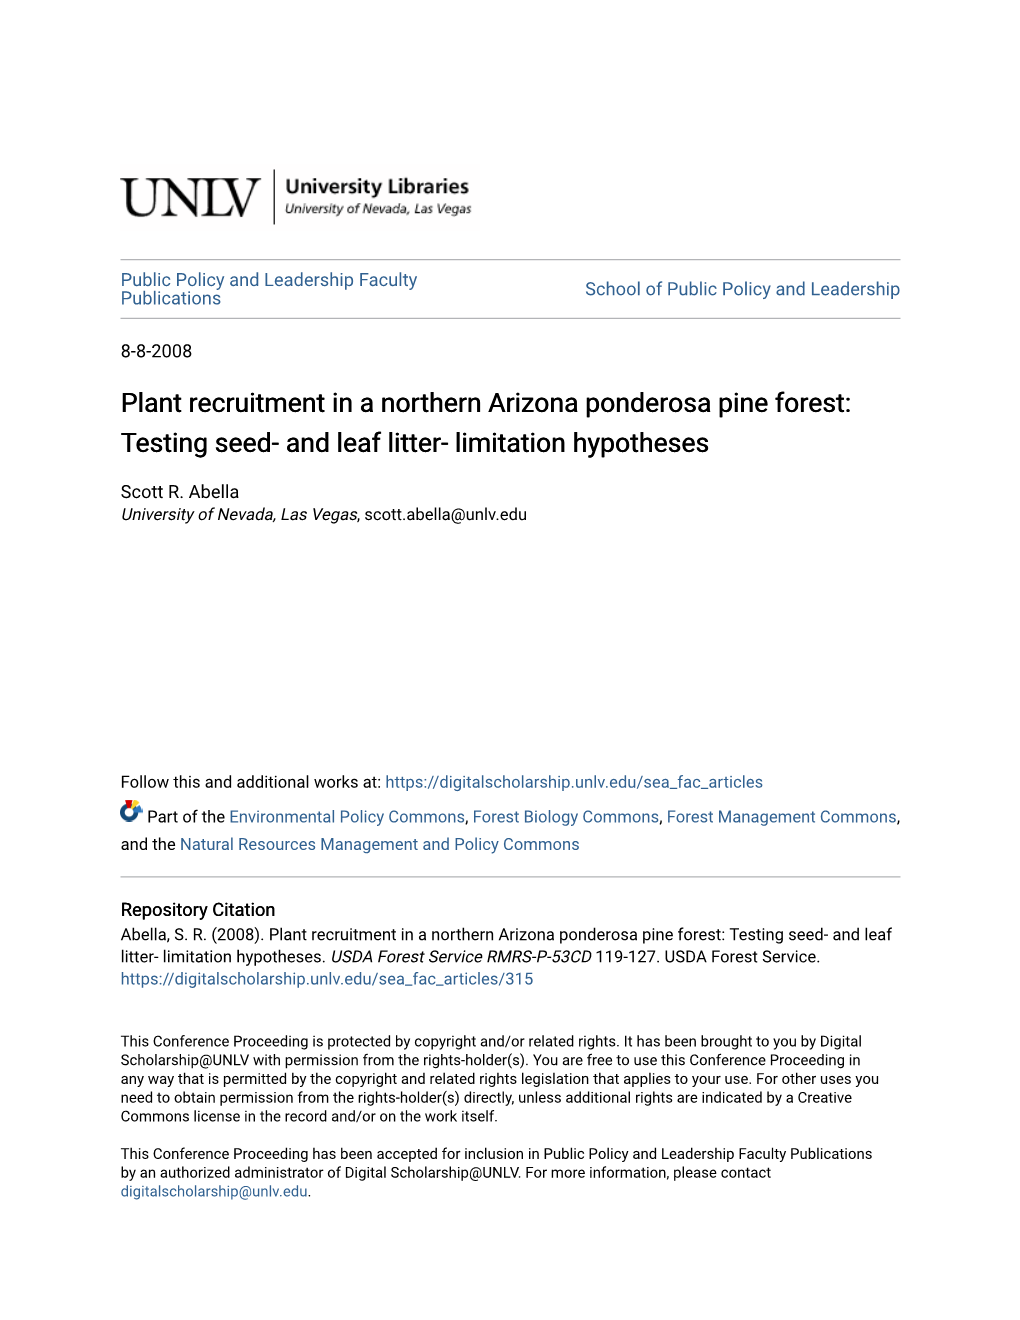 Plant Recruitment in a Northern Arizona Ponderosa Pine Forest: Testing Seed- and Leaf Litter- Limitation Hypotheses